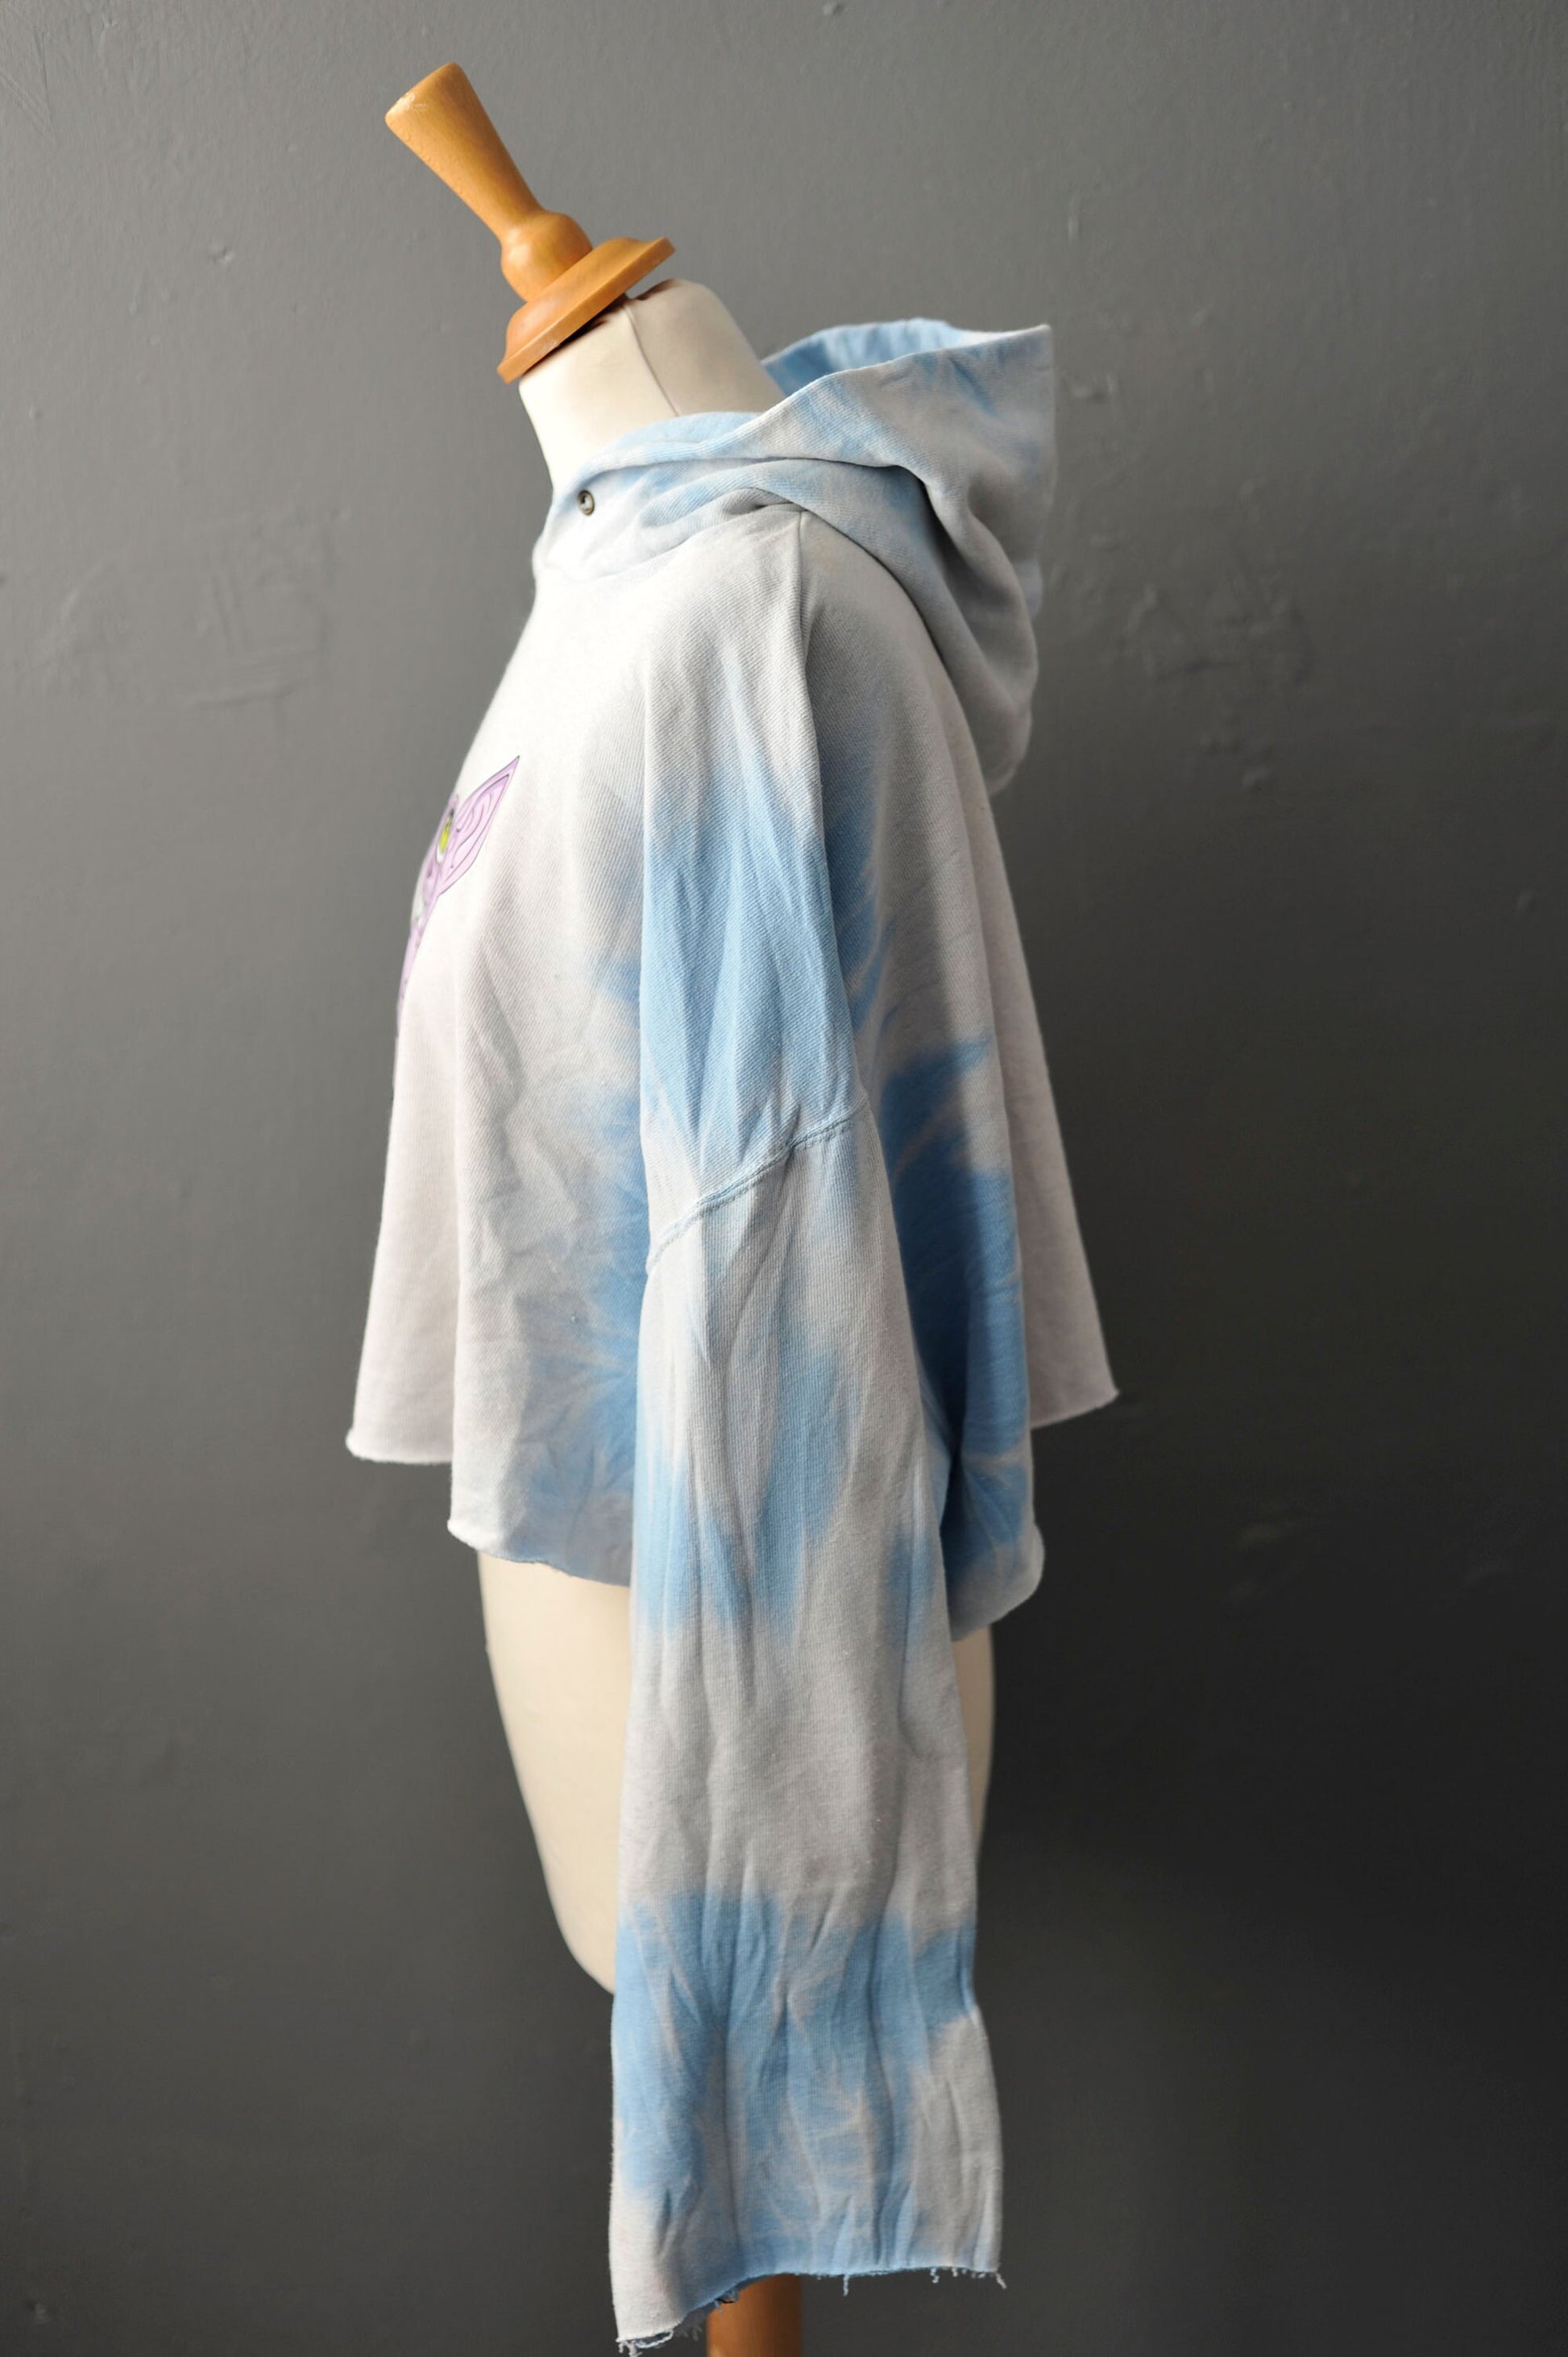 Ice Blue Tie Dye Cropped Hoodie with Occult Sphynx Cat